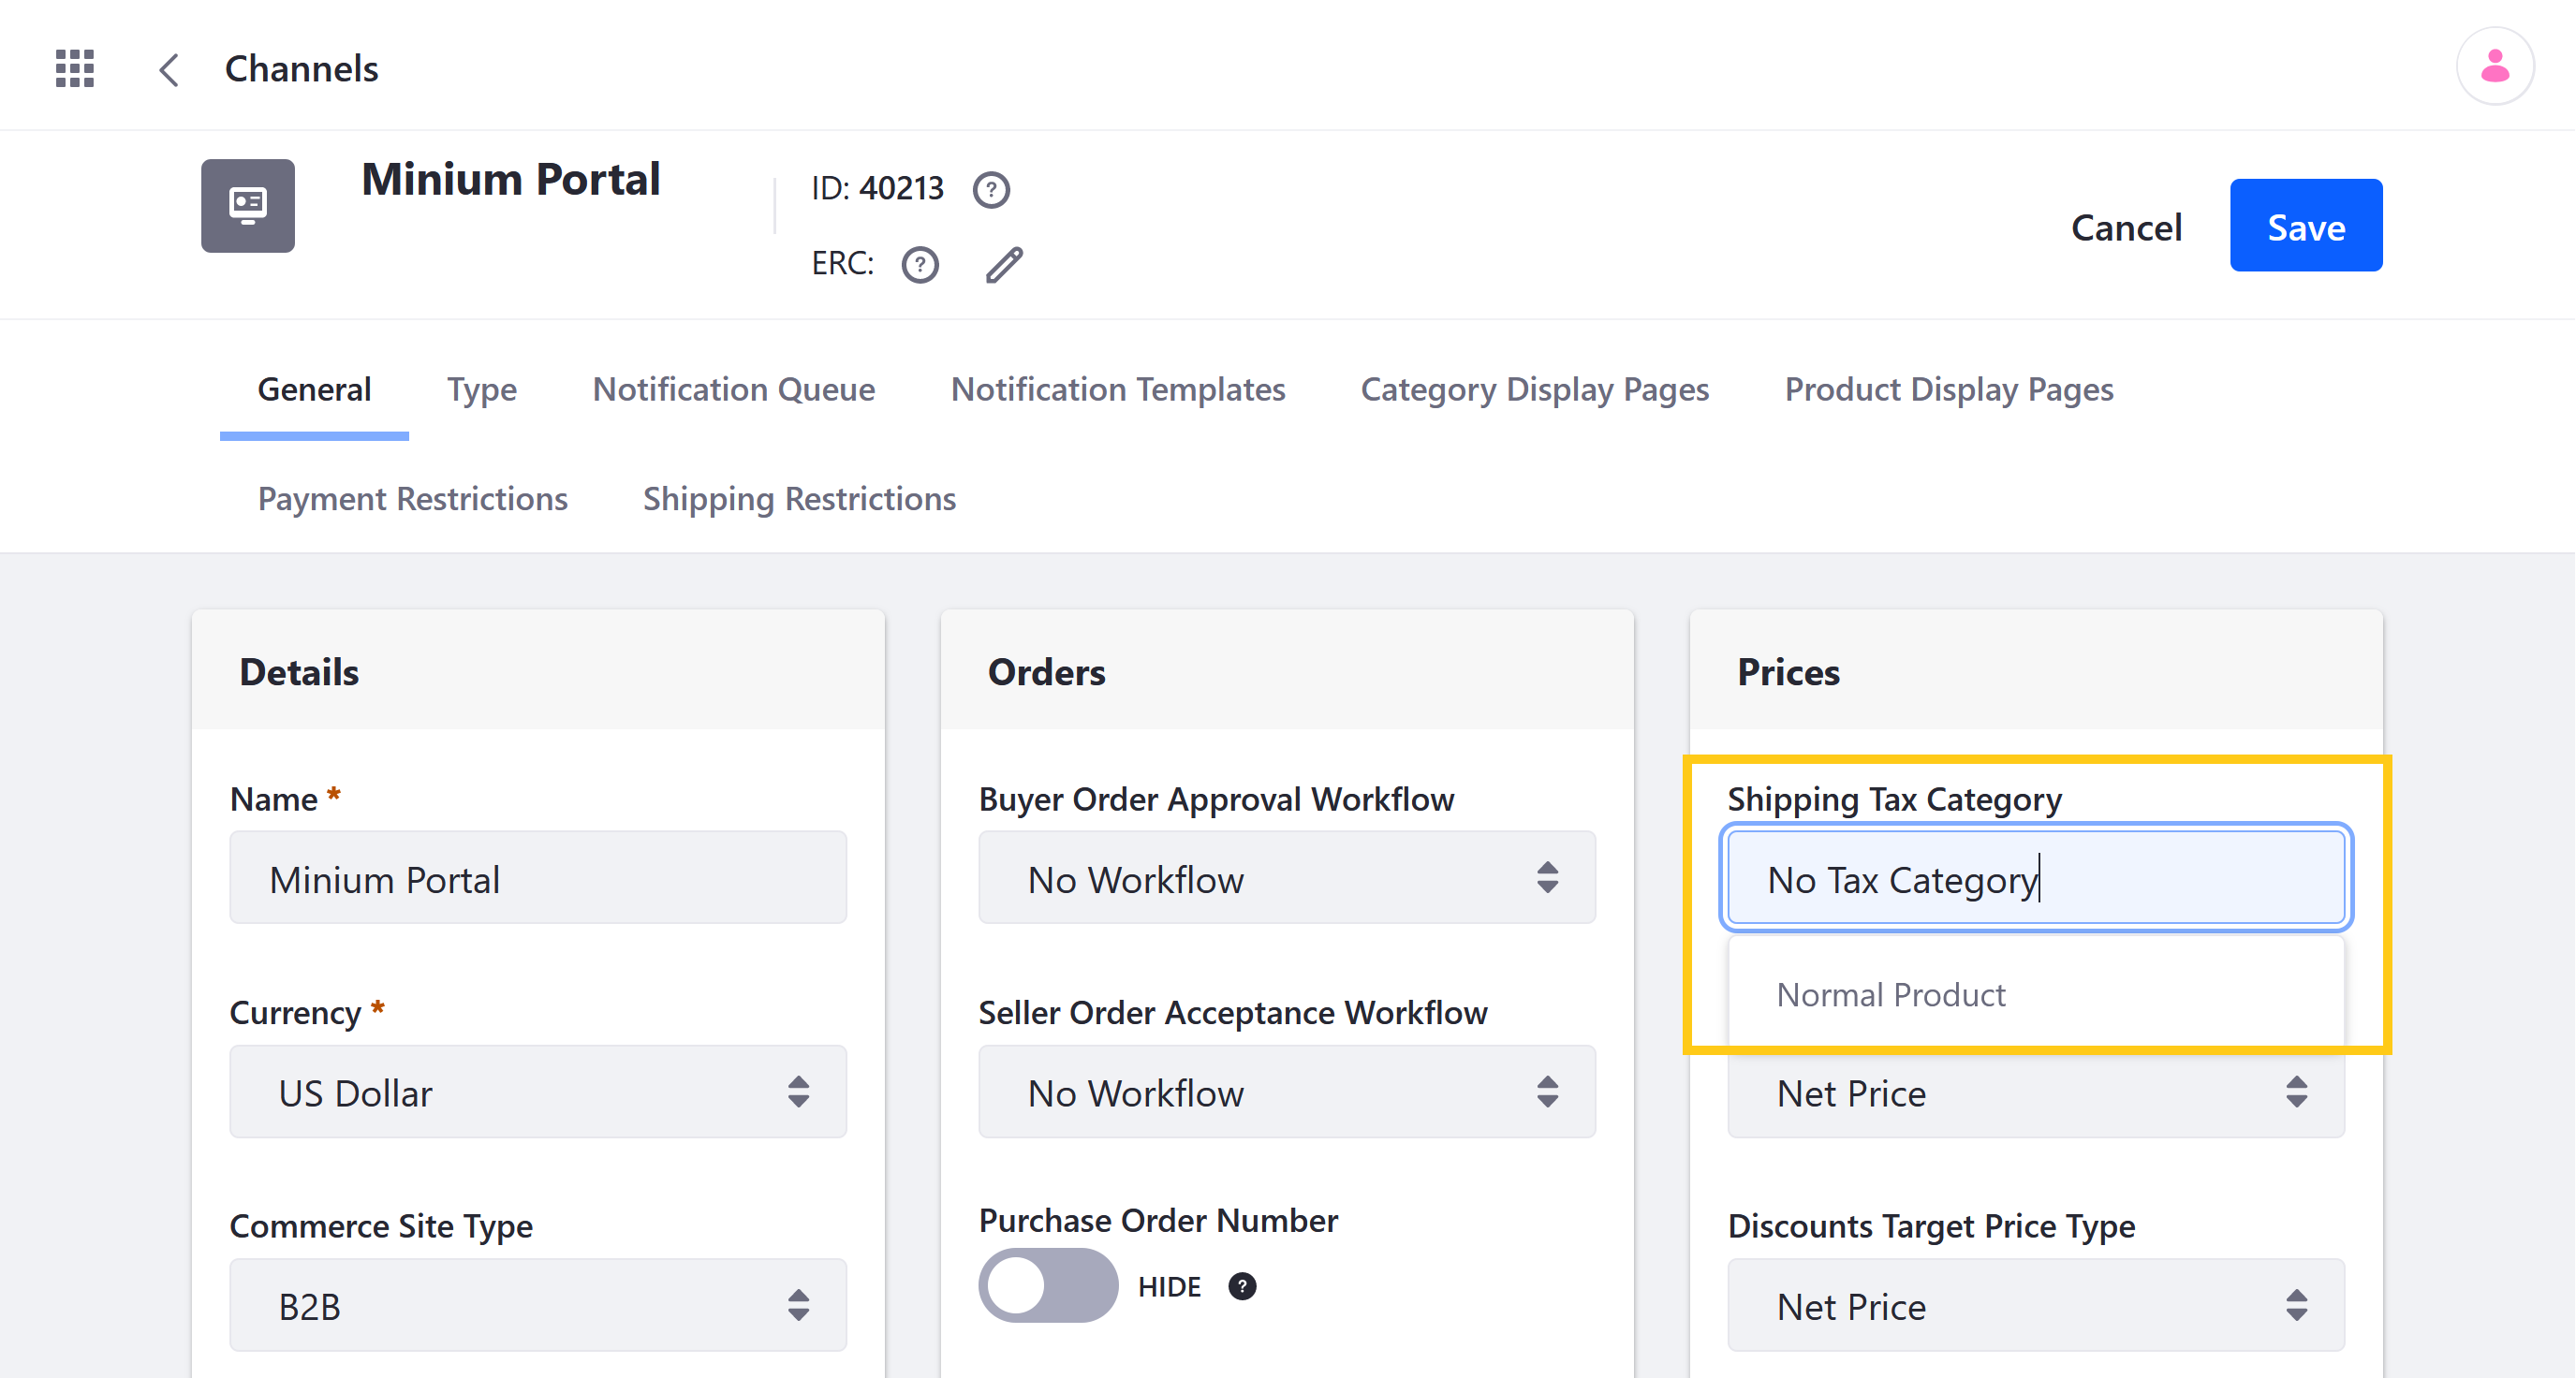 Select the Tax Category to use for shipping costs in applicable Channel orders.